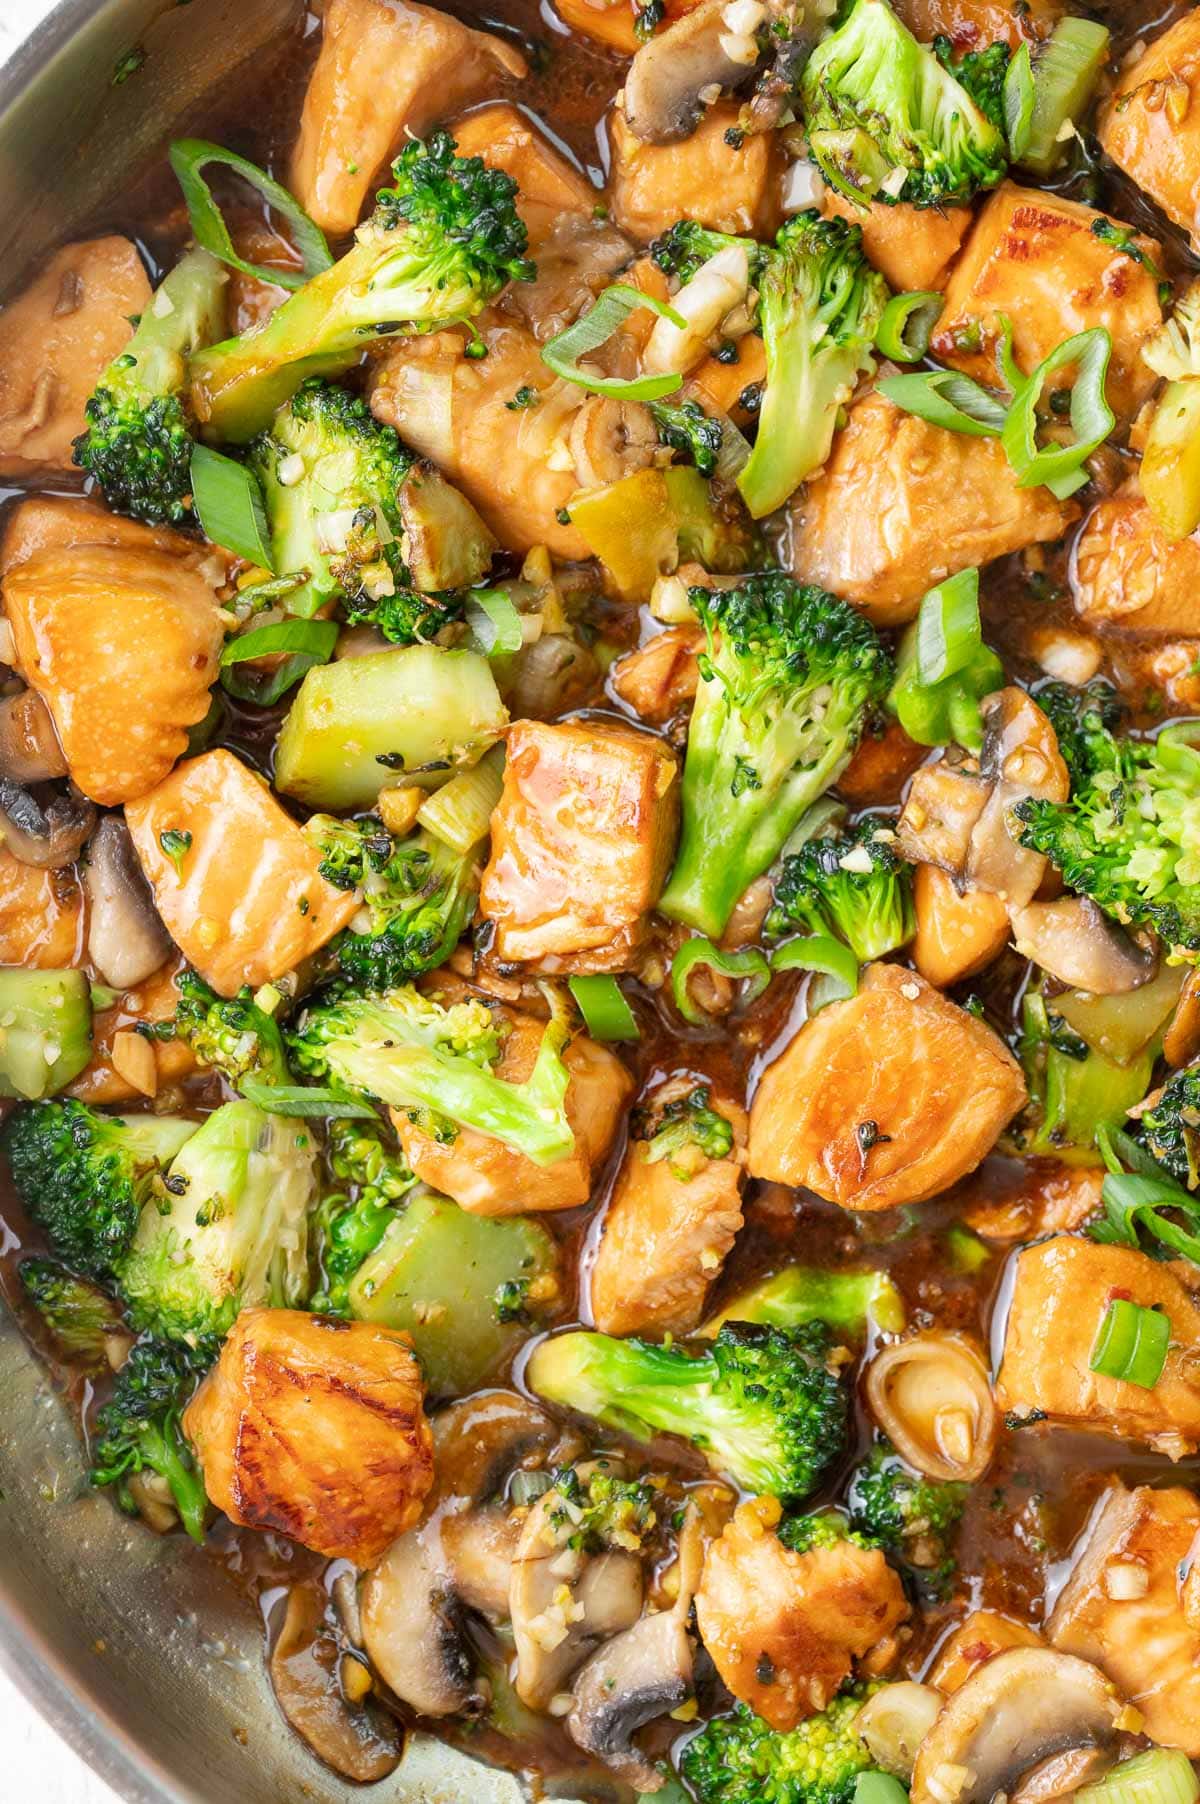 A close up photo of salmon stir fry with broccoli and mushrooms.